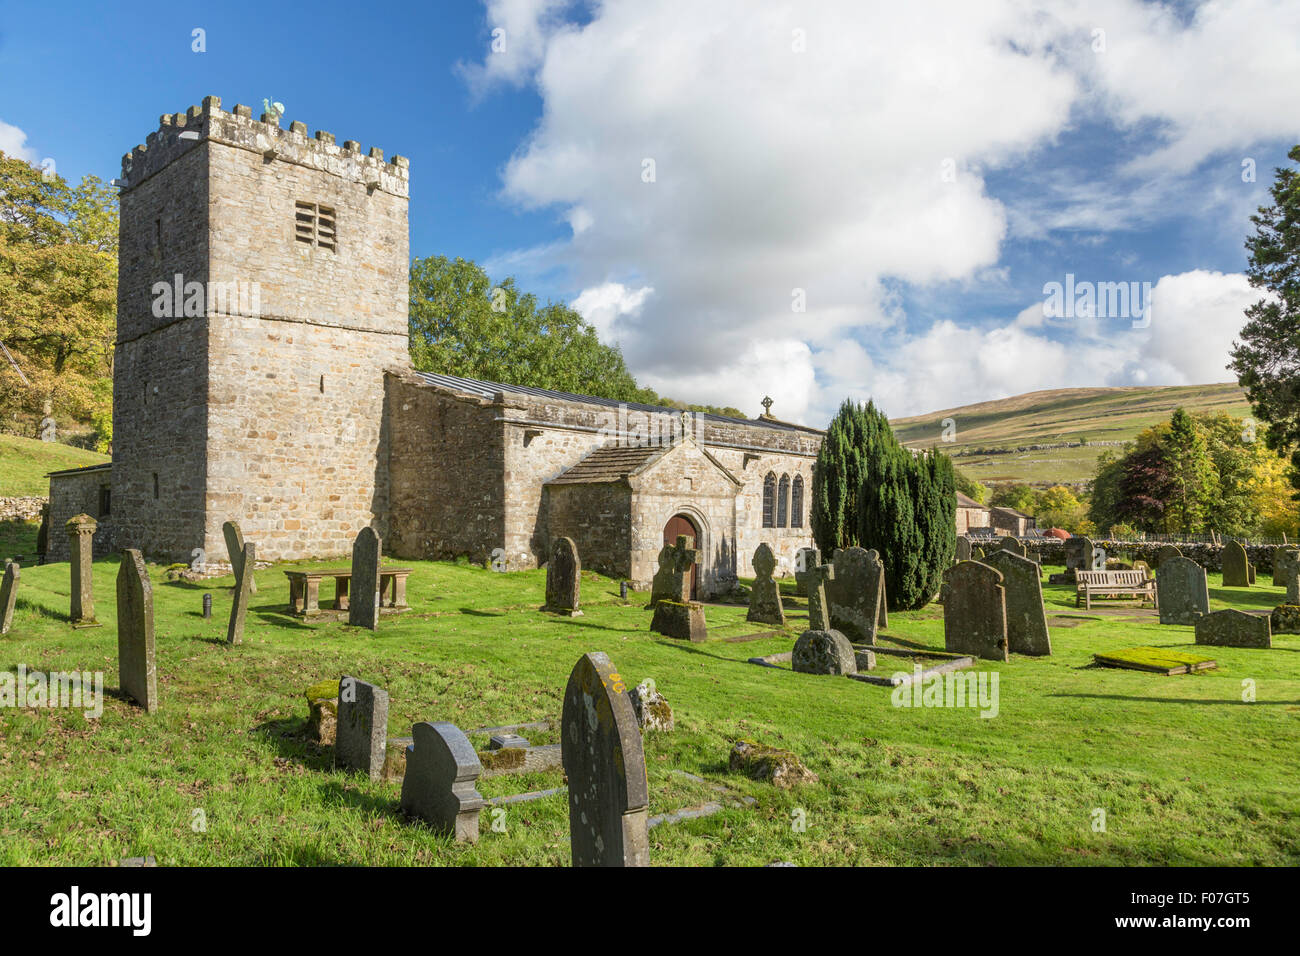 St. Michael and All Angels Church, Hubberholme near Buckden, Yorkshire Dales National Park, North Yorkshire, England, UK Stock Photo